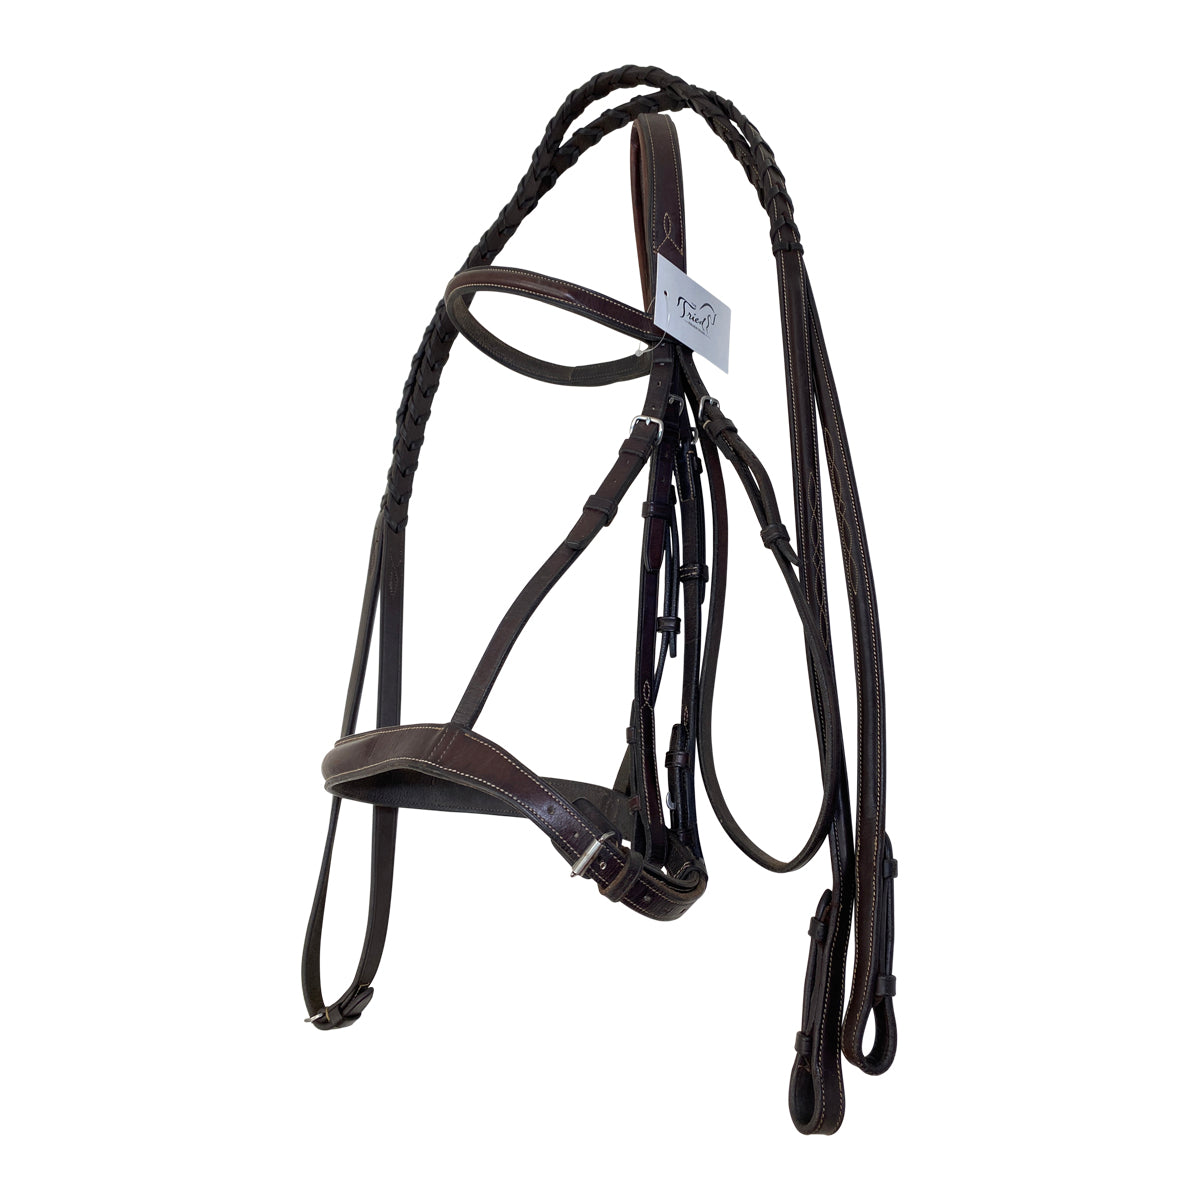 Showmark Hunter Bridle in Chocolate